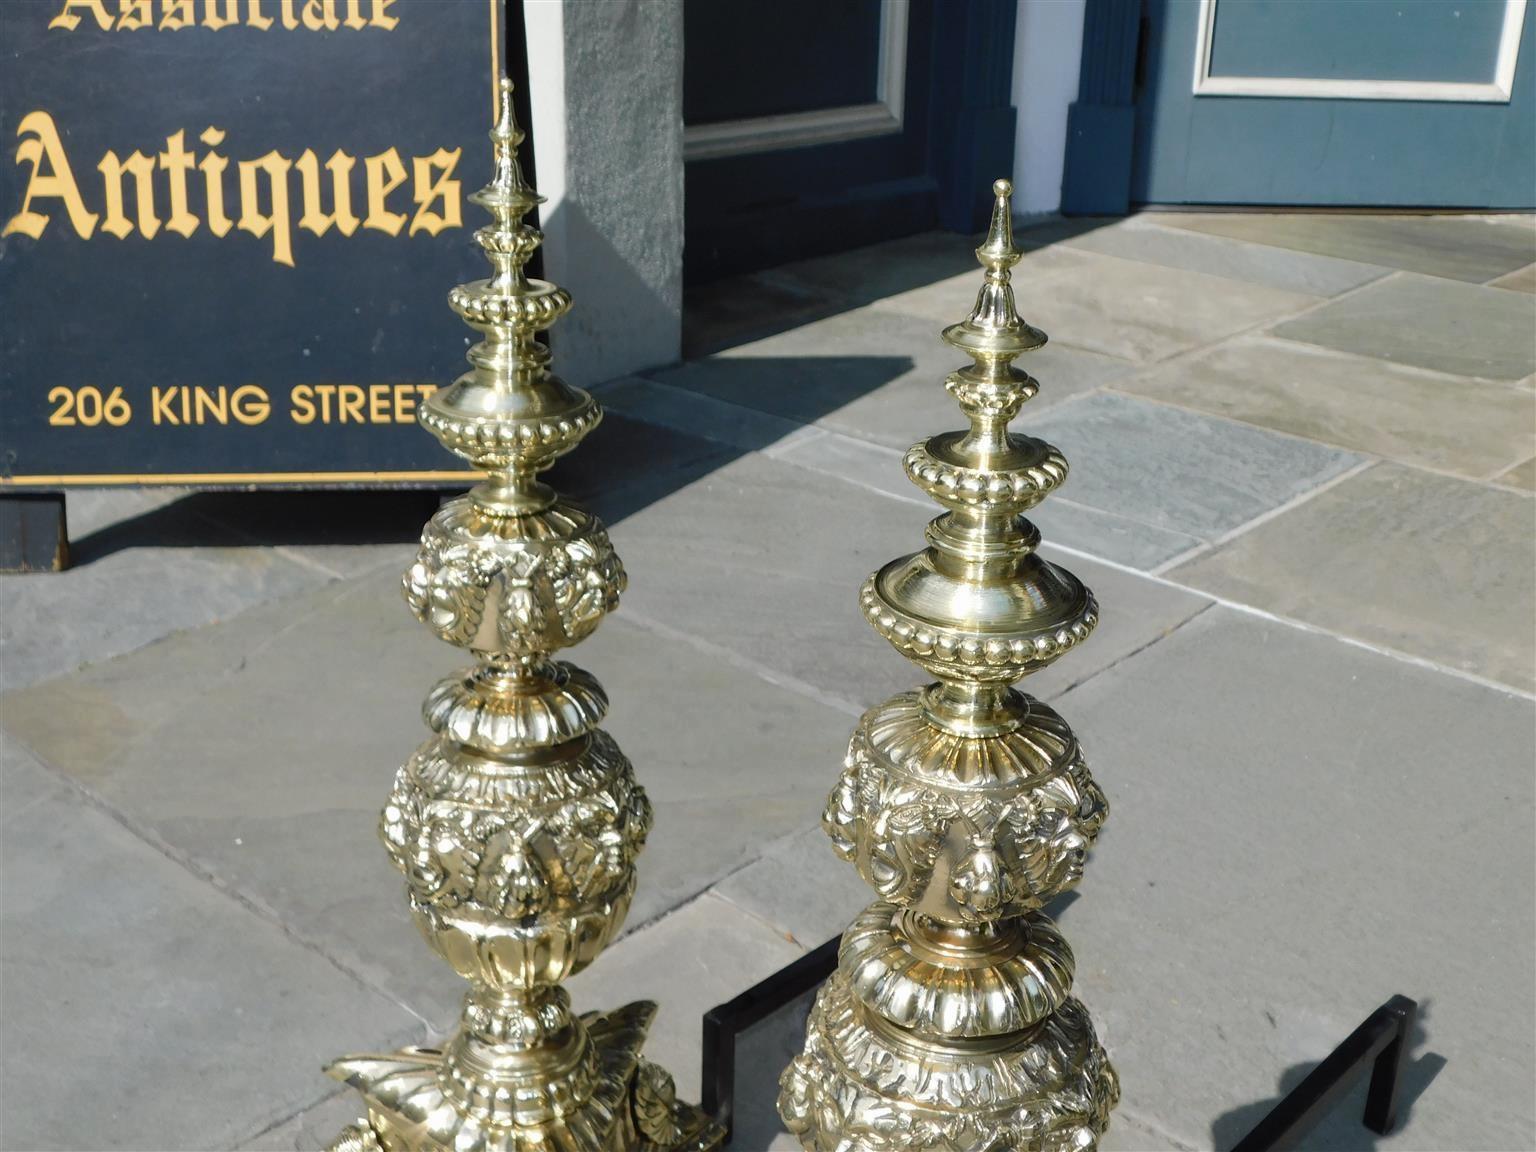 Pair of Italian Brass Neoclassical Figural Tiered Urn Finial Andirons, C. 1820 For Sale 2